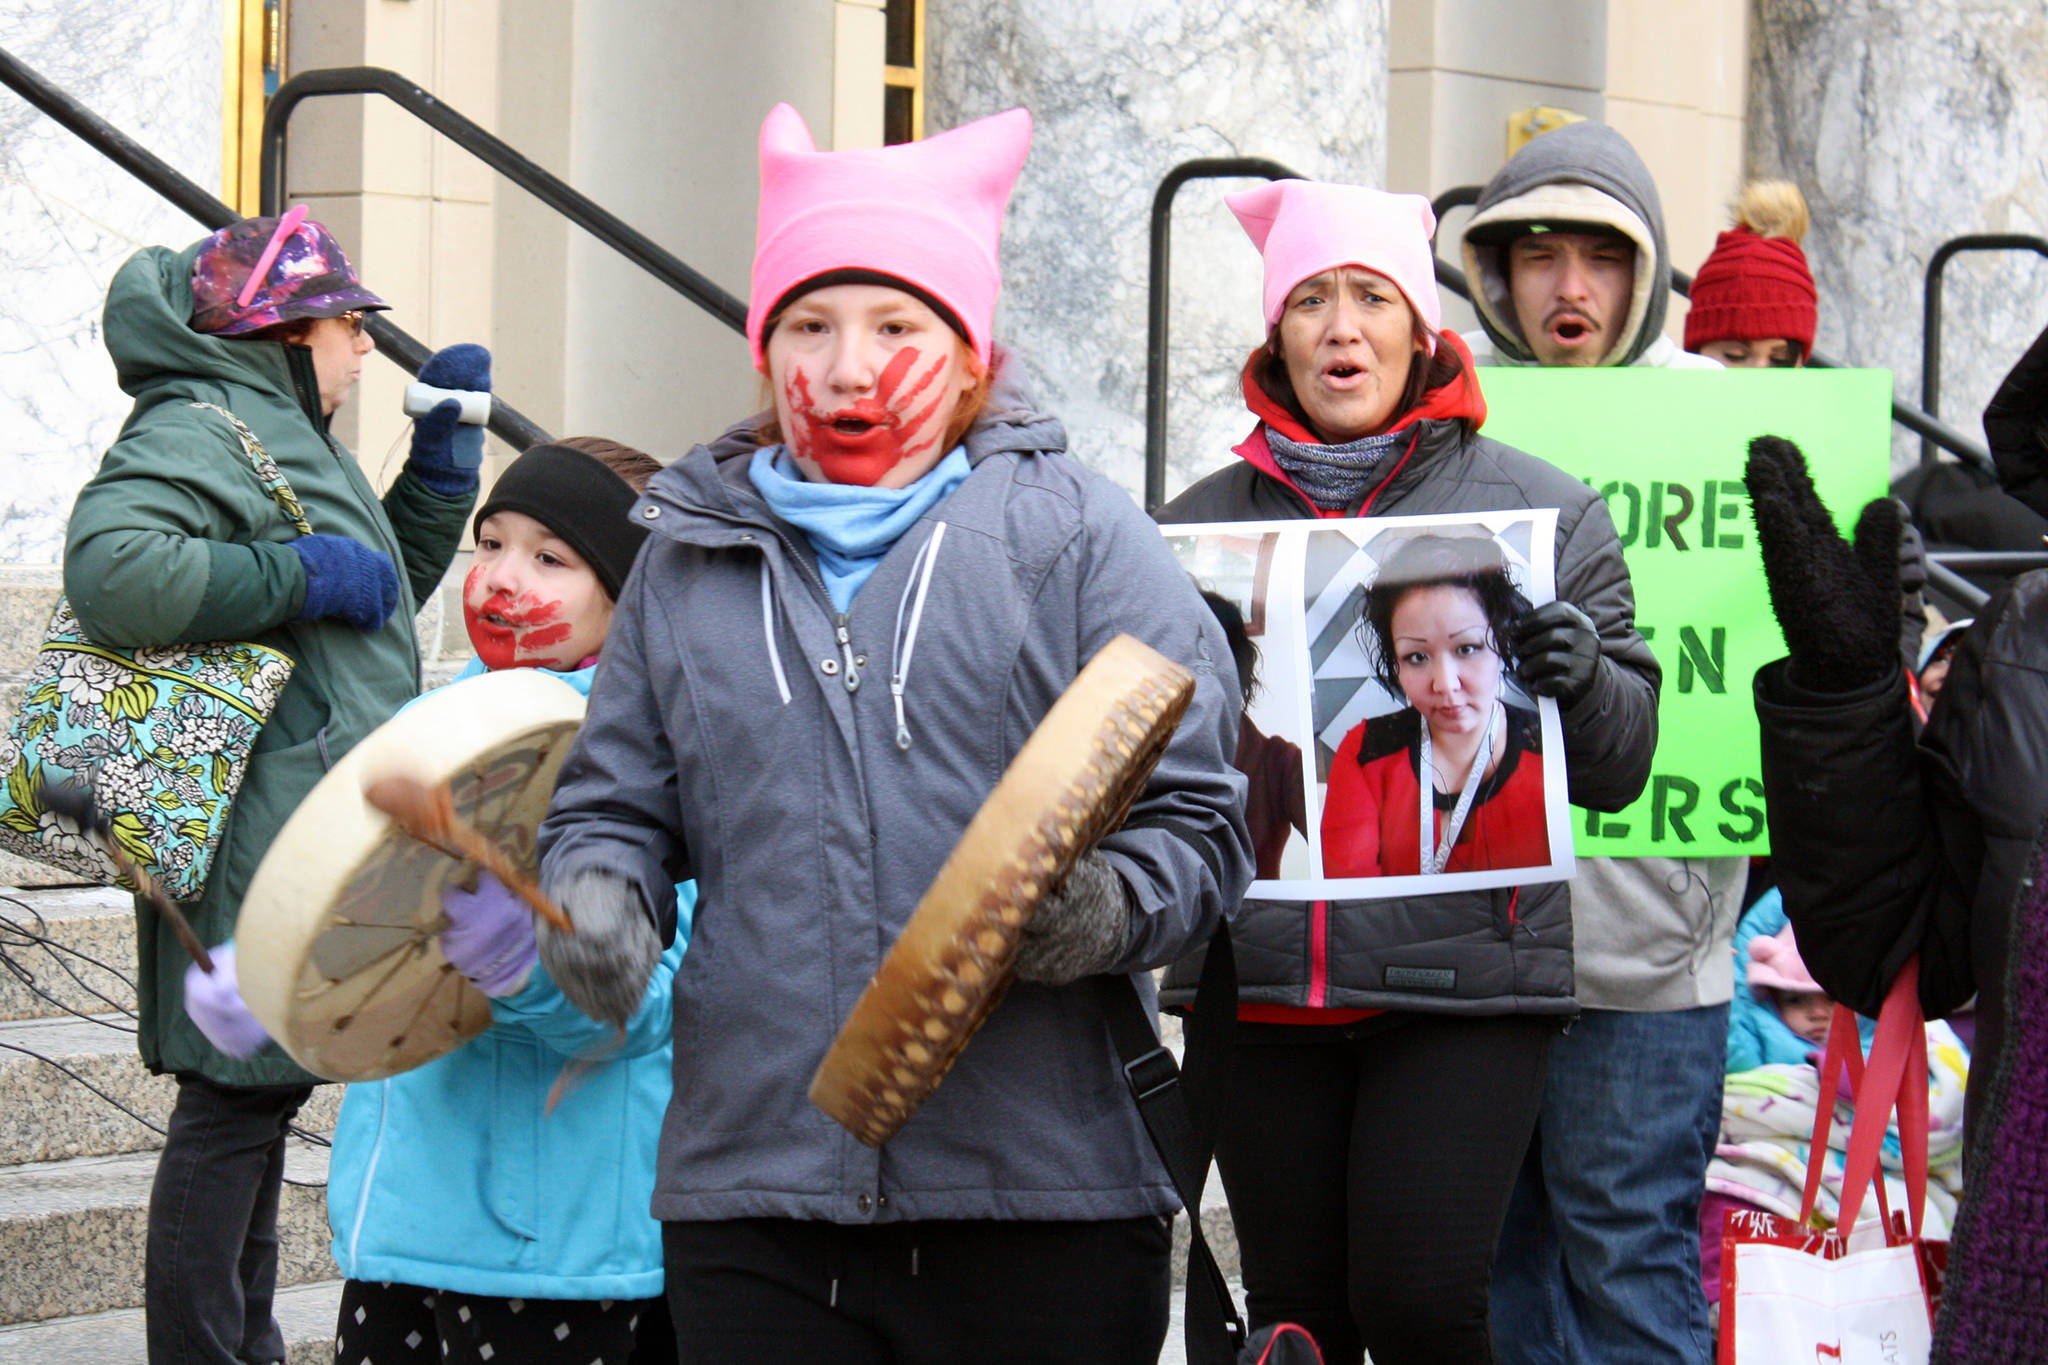 Aaliyah Cropley, 12, beats her drum and leads marchers away from the Alaska State Capitol and toward Centennial Hall at the 2020 Women’s March, Saturday Jan. 18. (Ben Hohenstatt | Juneau Empire)